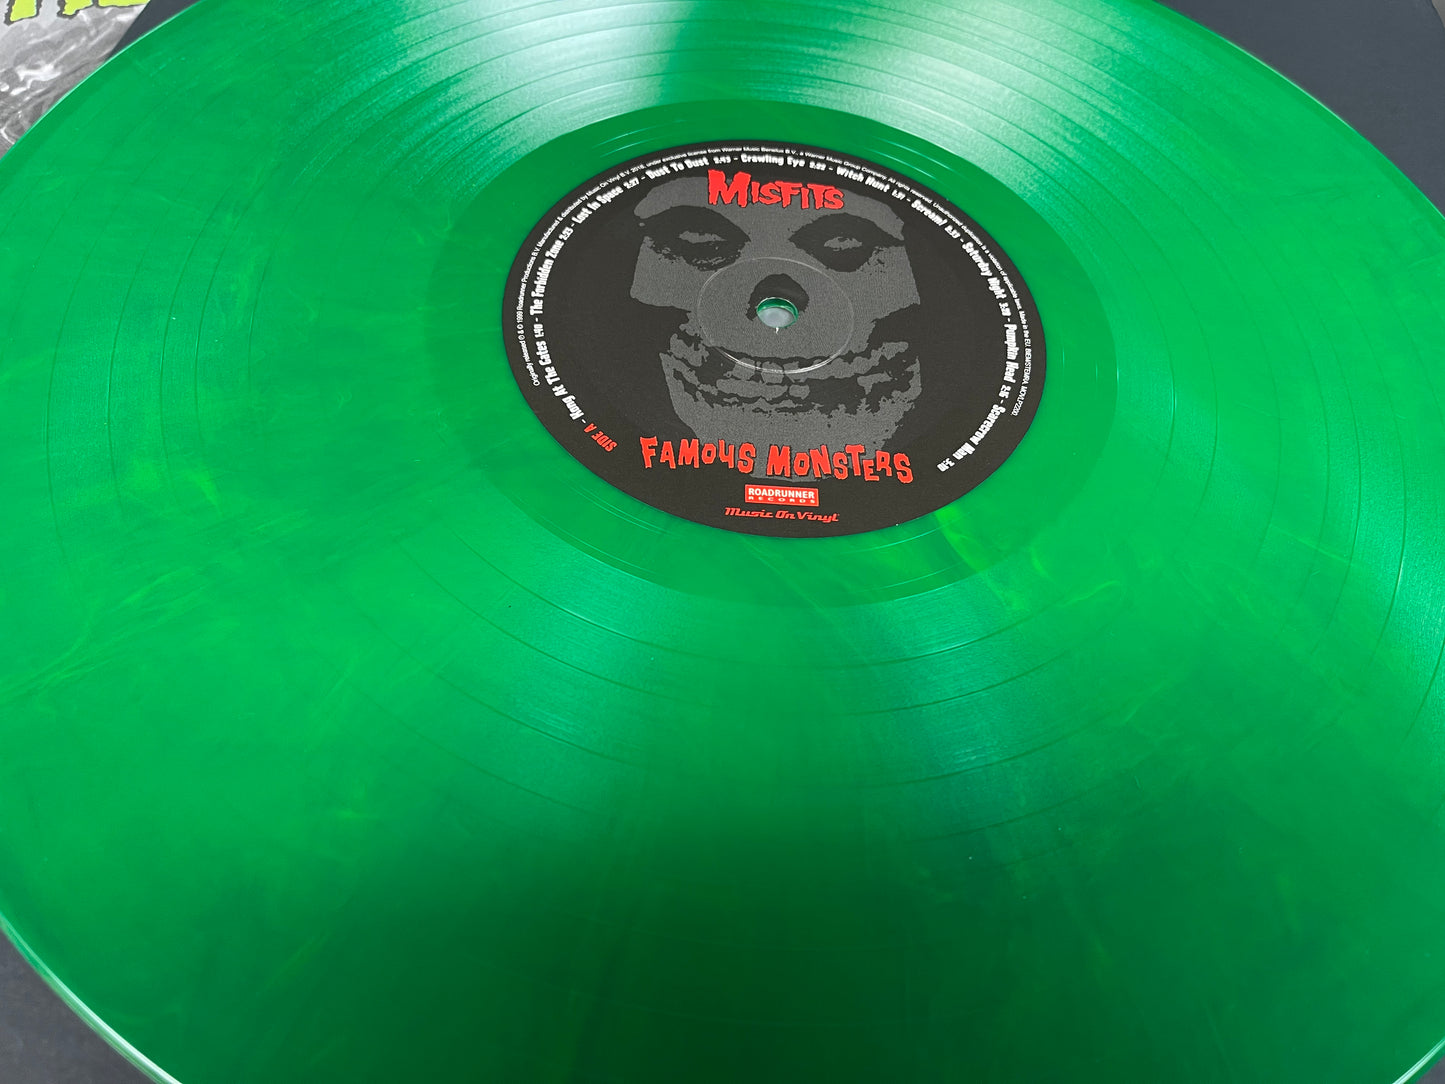 Misfits - Famous Monsters (2018, EU Music On Vinyl, Green, Numbered, *Autographed*)